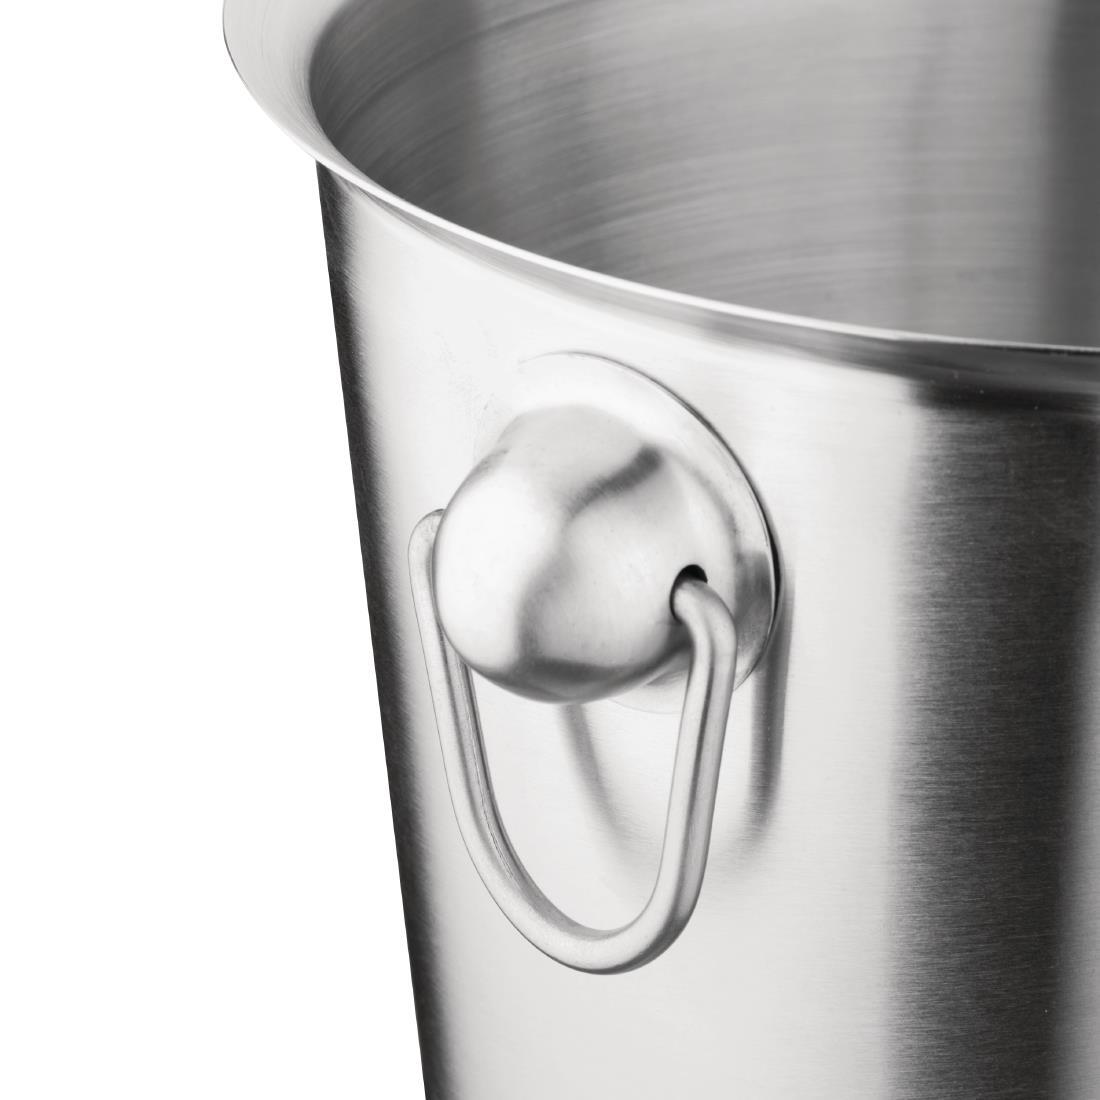 Olympia Brushed Stainless Steel Wine and Champagne Bucket - K406  - 2